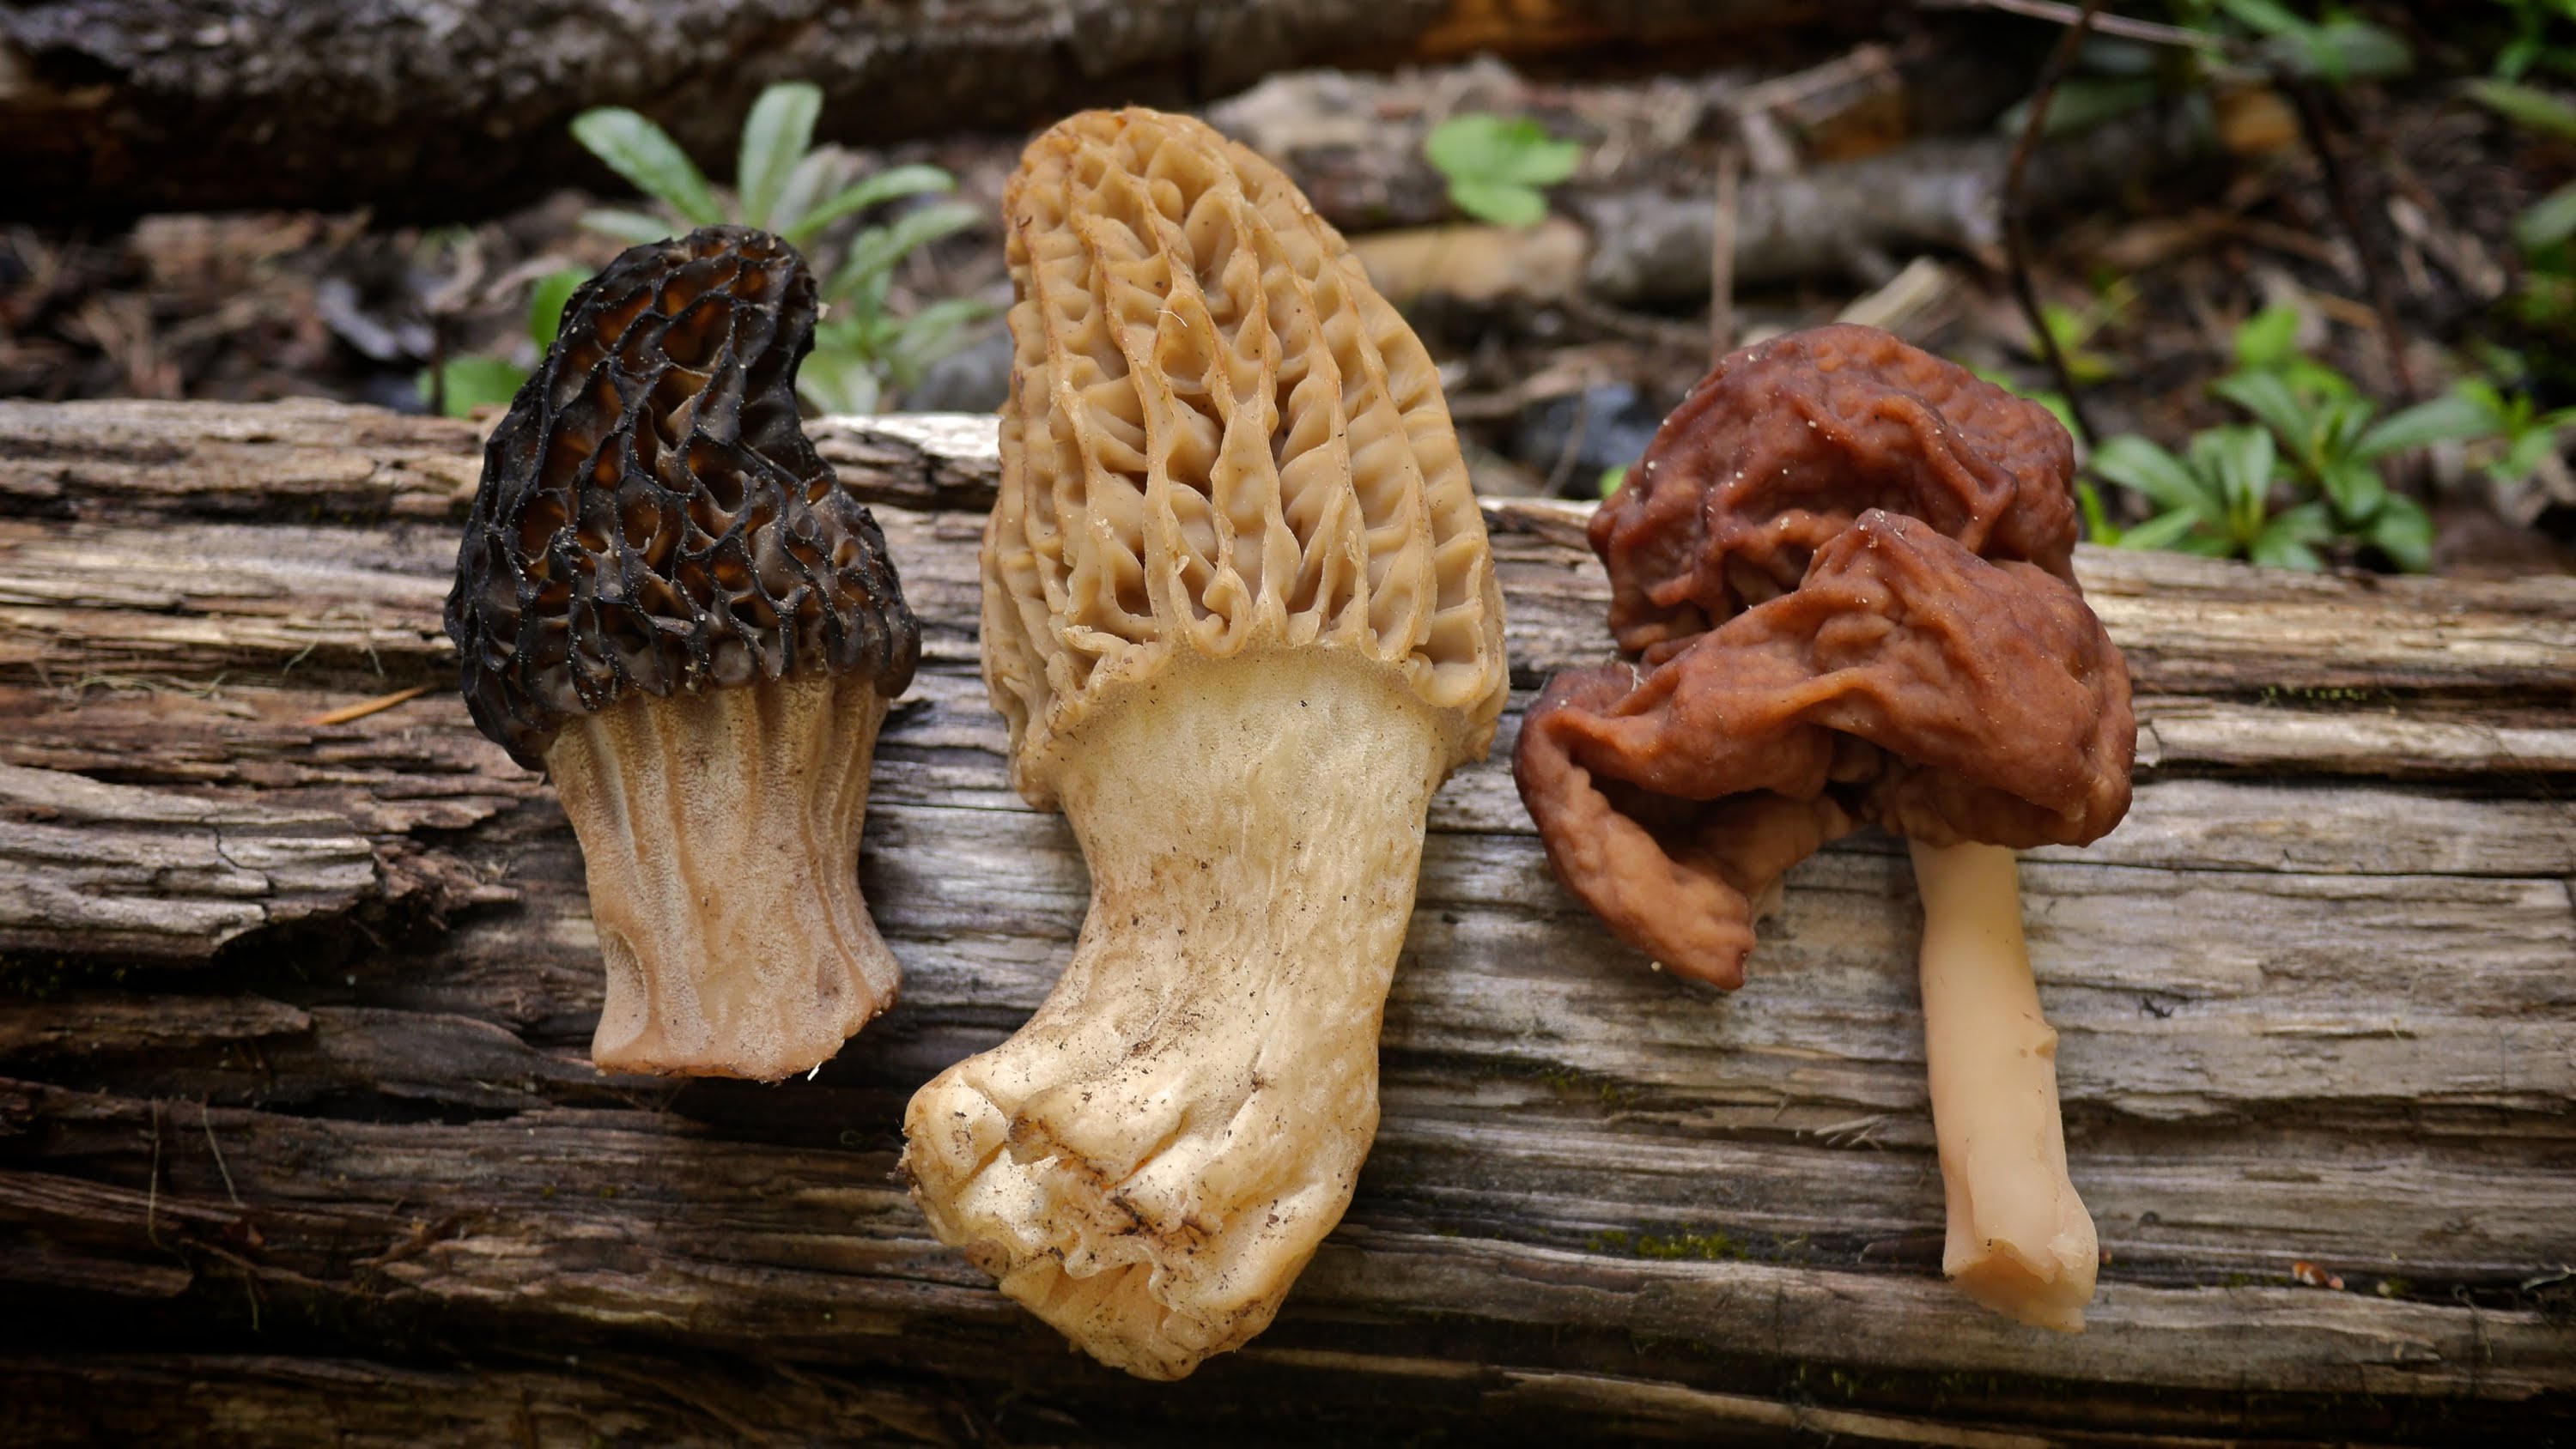 Morel Mushrooms 101: How to safely locate and harvest morels - YouTube